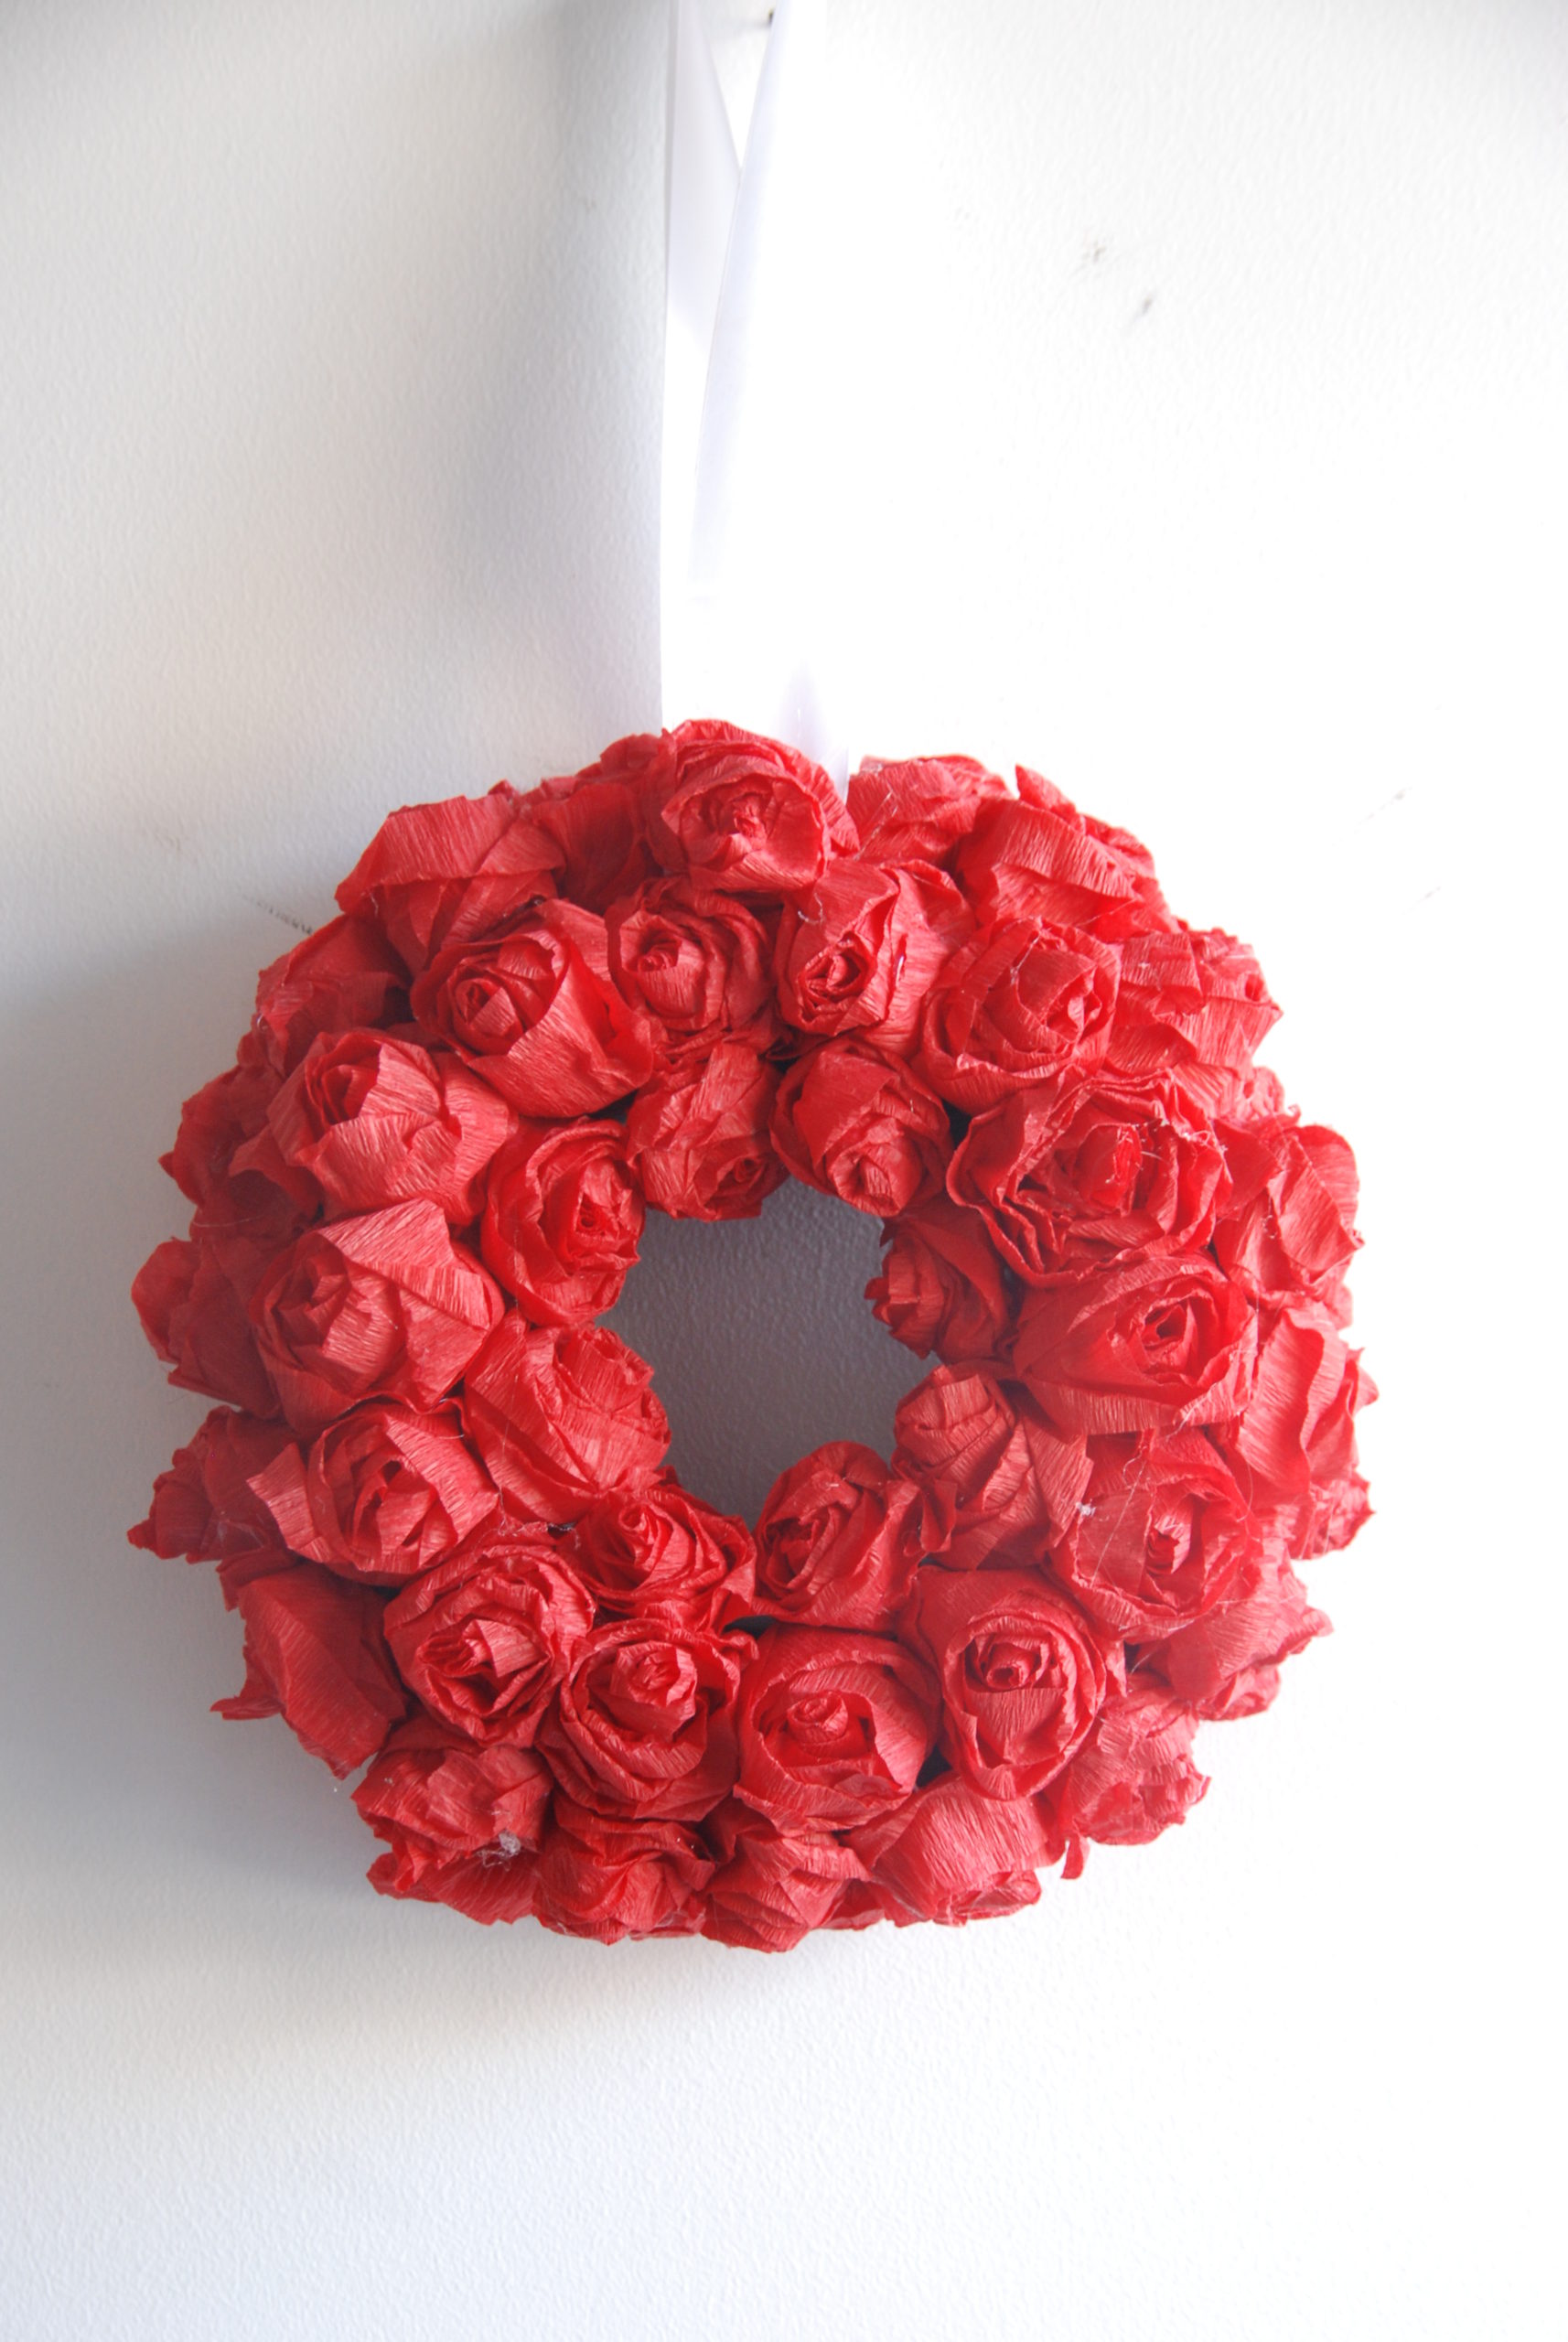 {Past Projects} Crepe Paper Rose Wreath